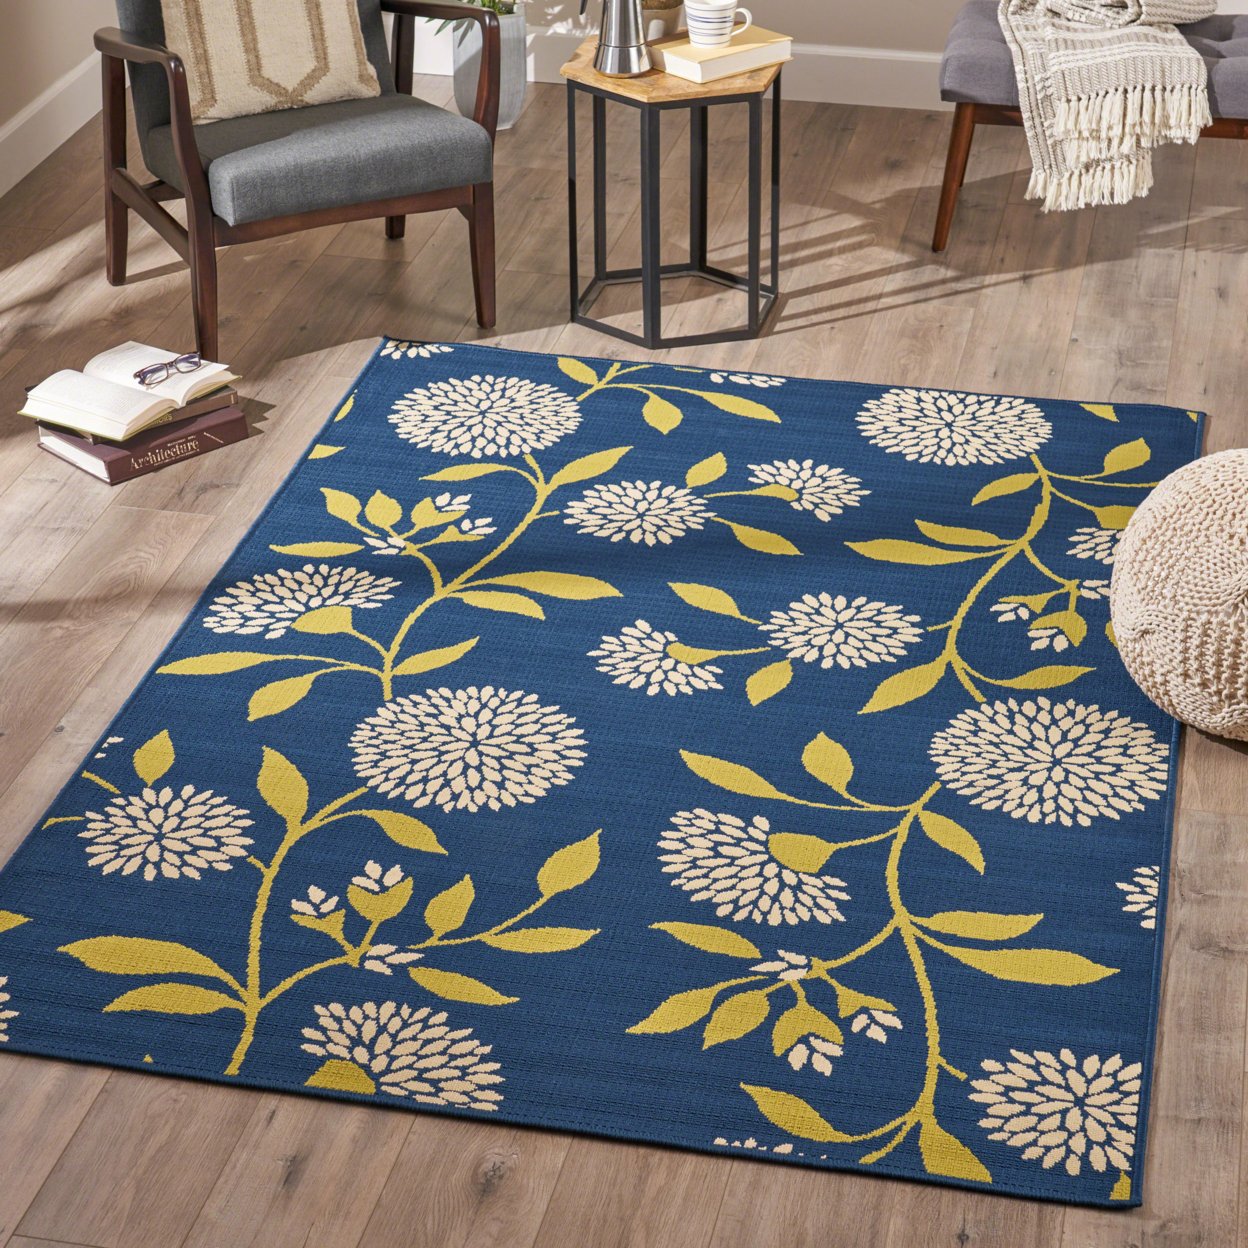 Max Indoor Floral Area Rug, Blue And Green - Blue + Green, 8' X 11'